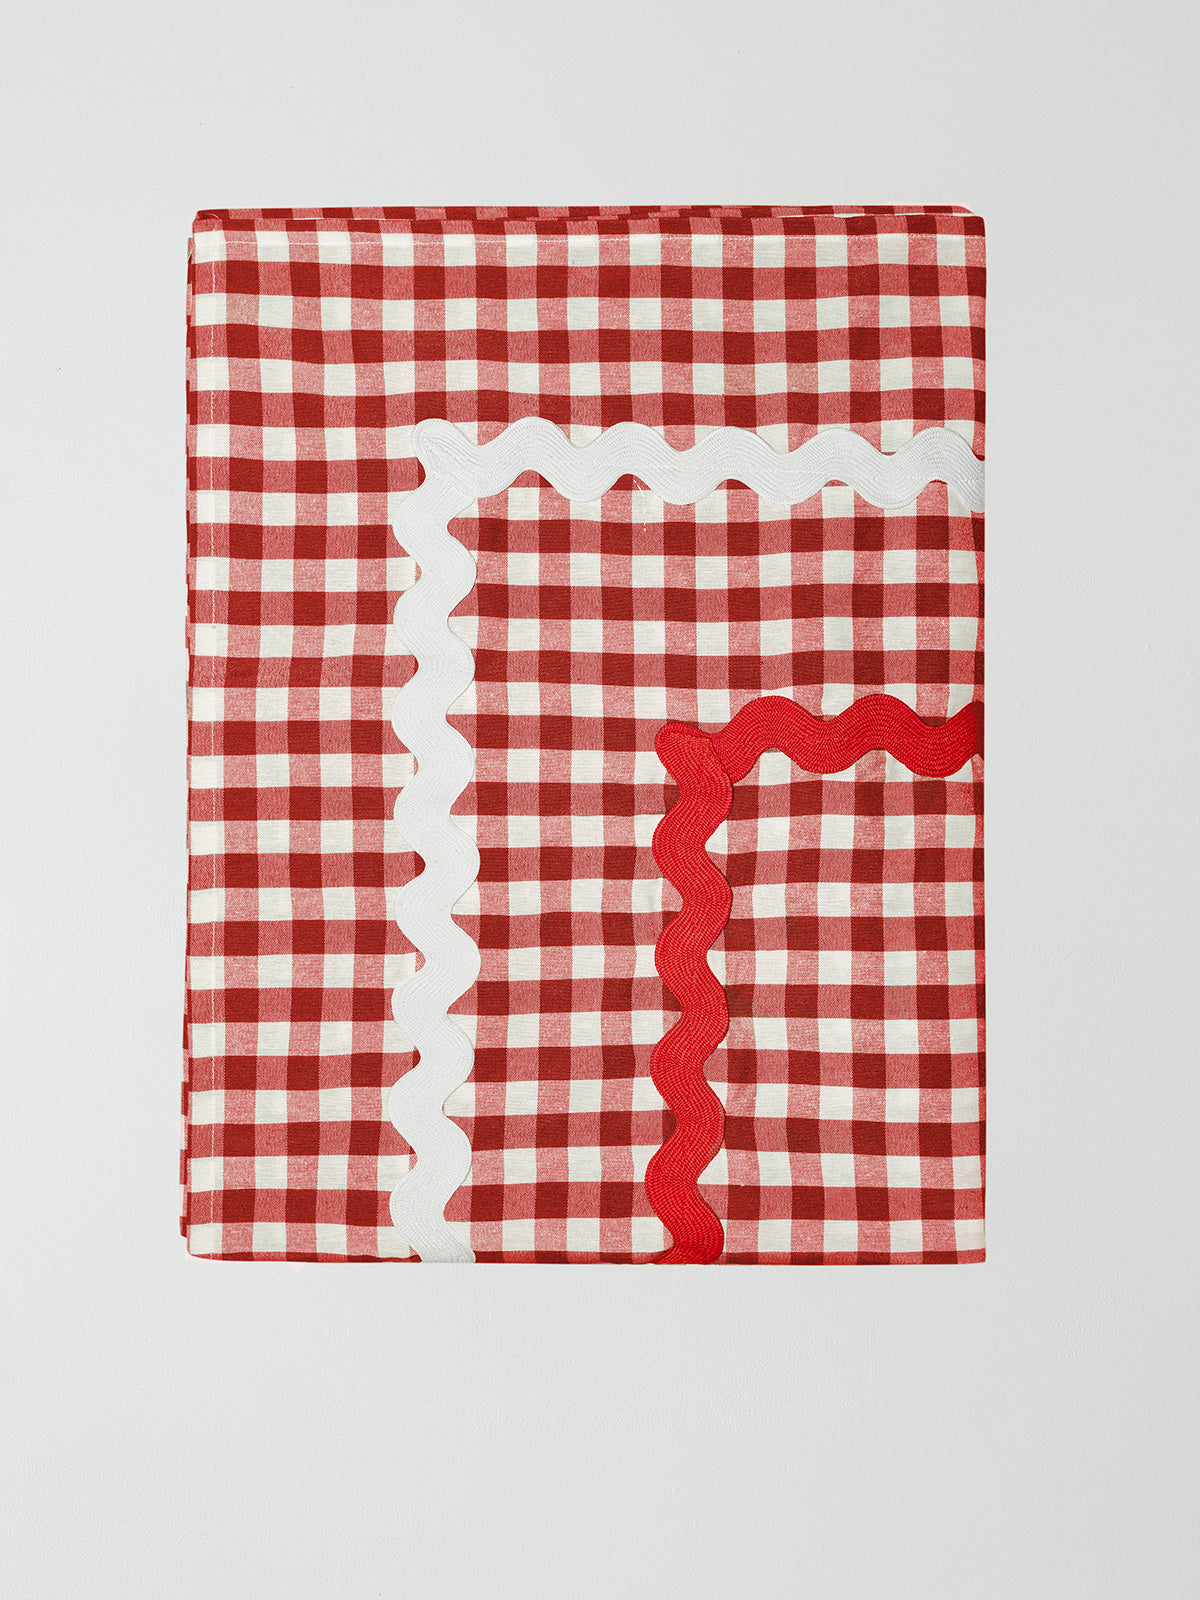 Rectangular tablecloth made of&nbsp;red and white vichy check cotton with&nbsp;white and&nbsp;red trim